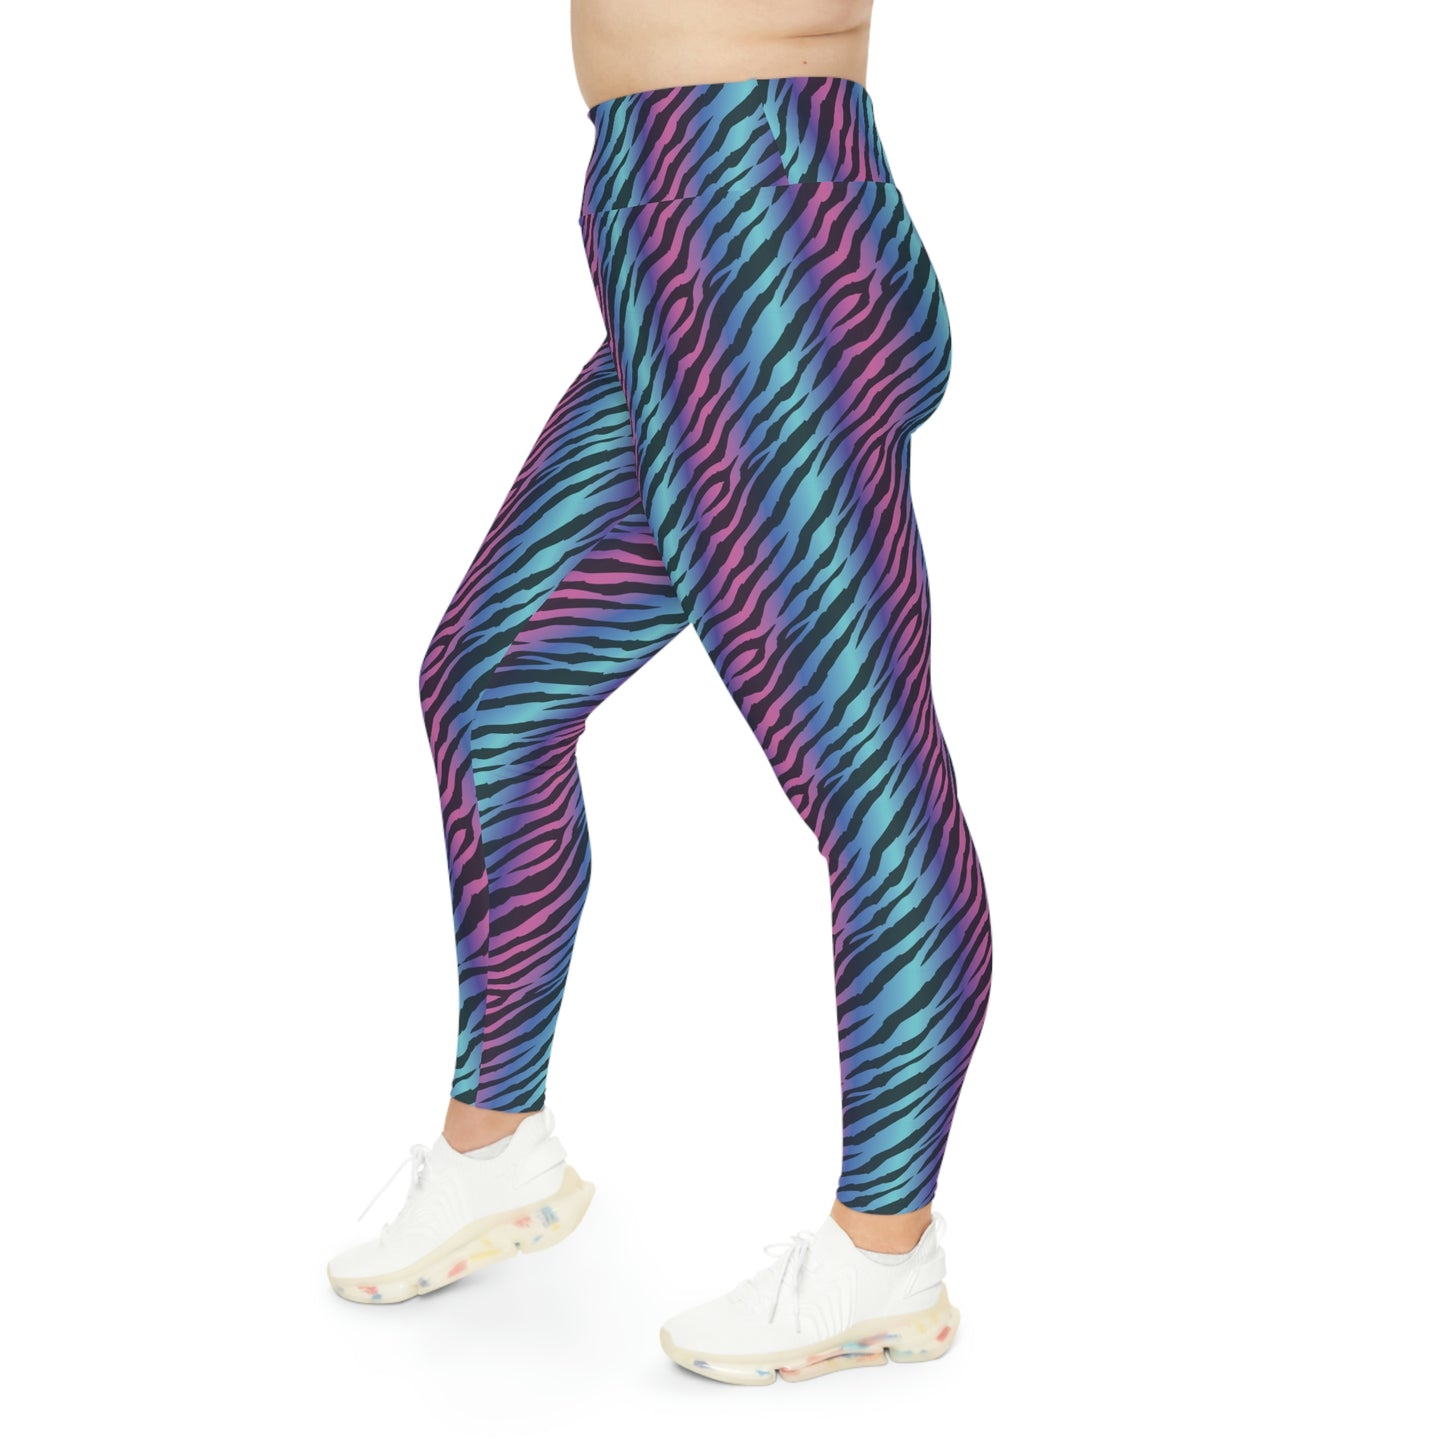 Zebra Print Plus Size Leggings One of a Kind Gift - Unique Workout Activewear tights for Mom fitness, Mothers Day, Girlfriend Christmas Gift